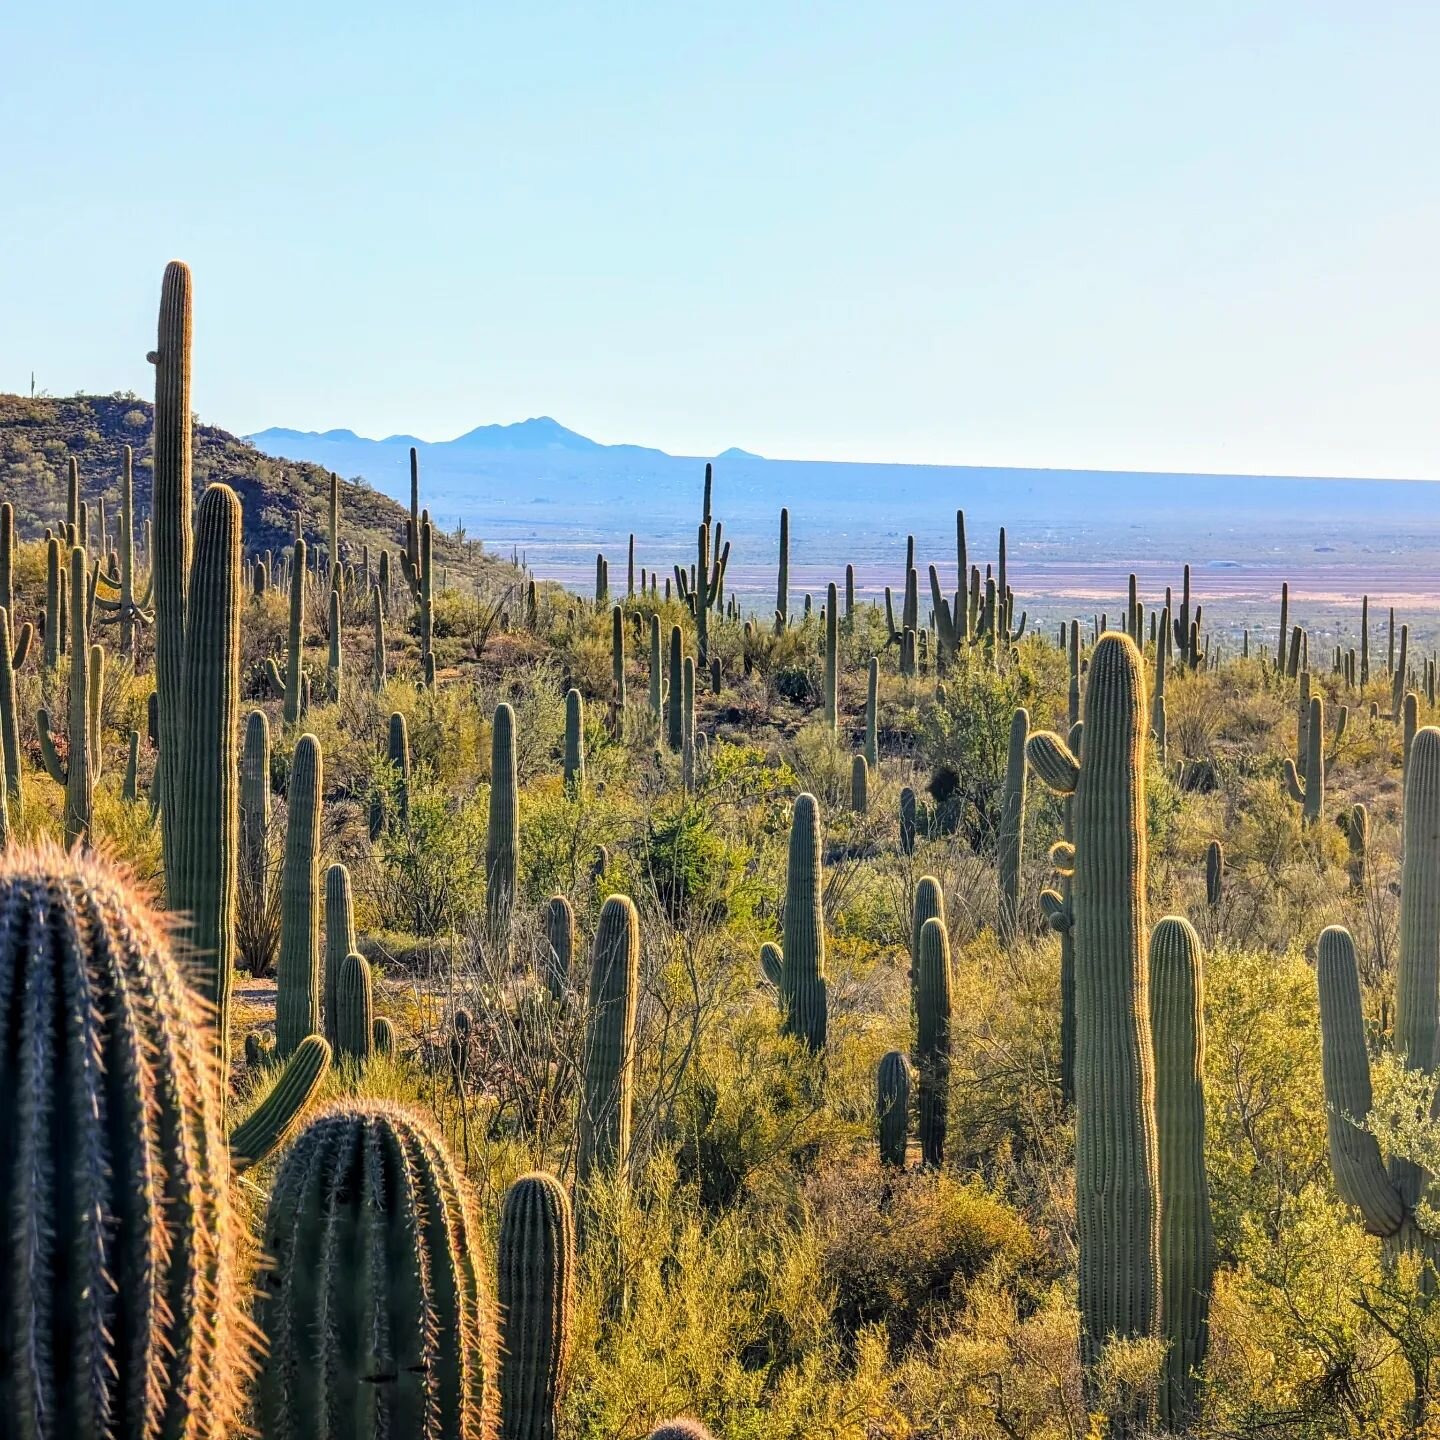 Drove through Saguaro NP on the way to Tucson for the gem/mineral/fossil show.
It is nice to get away from the rainpocalypse for a bit not gonna lie.